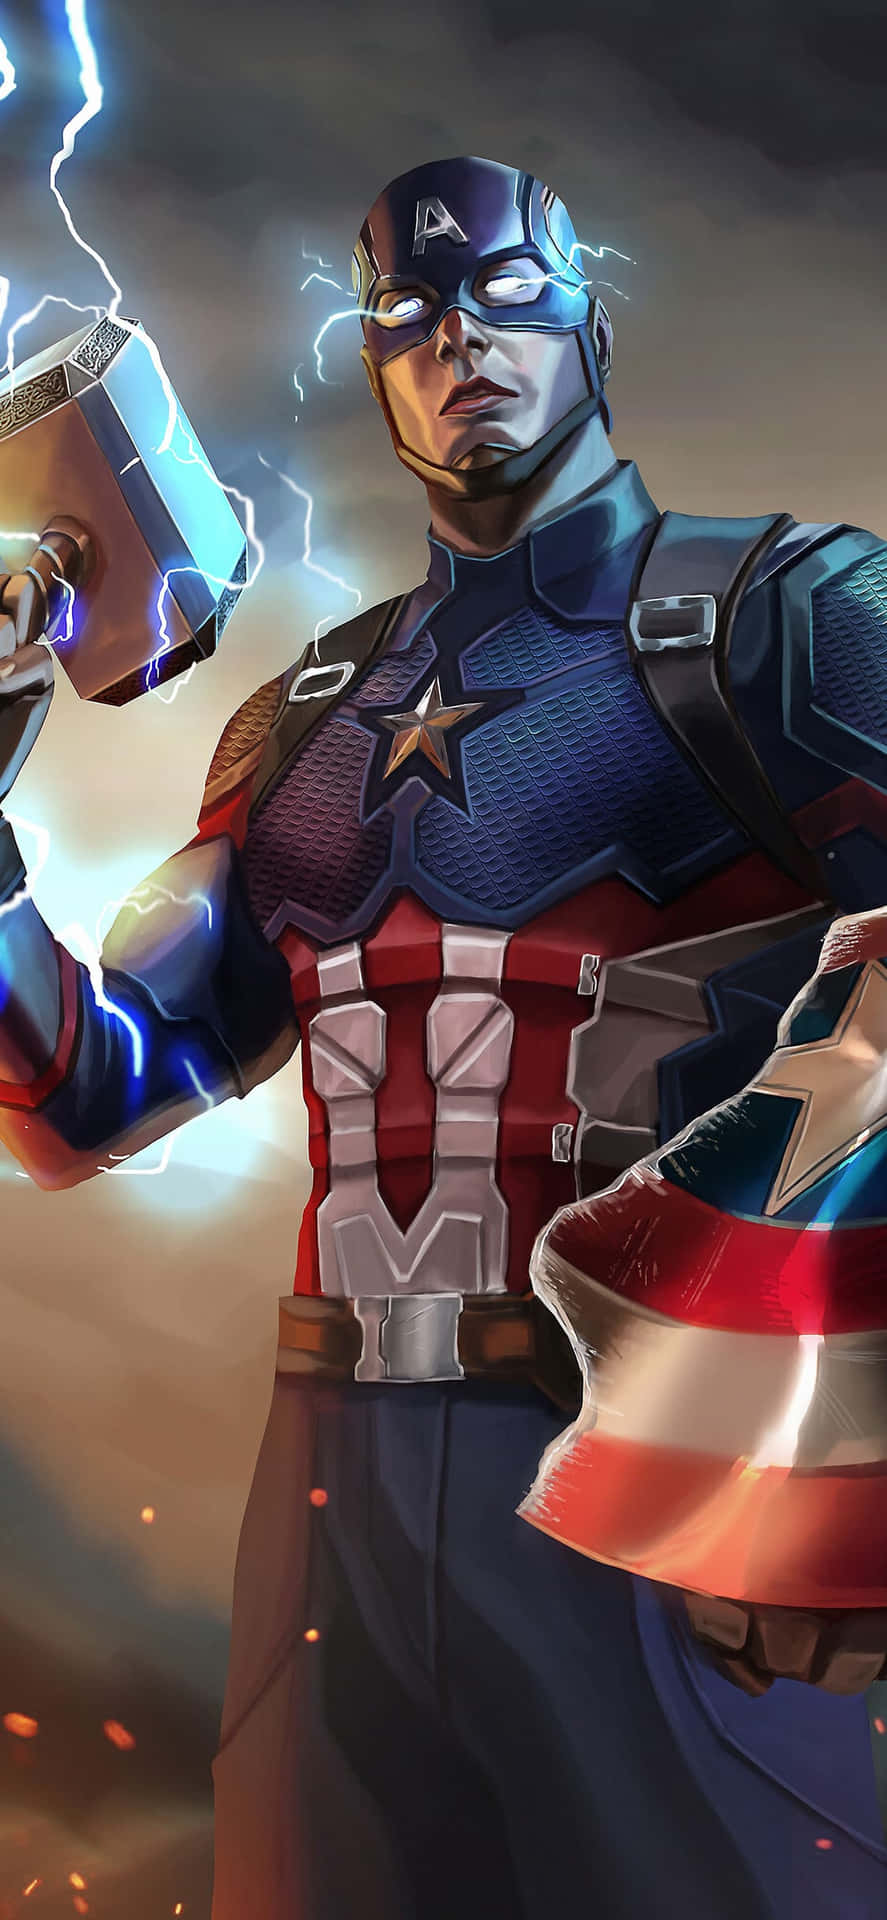 Your phone's home screen is now ready for an Avengers-themed makeover.